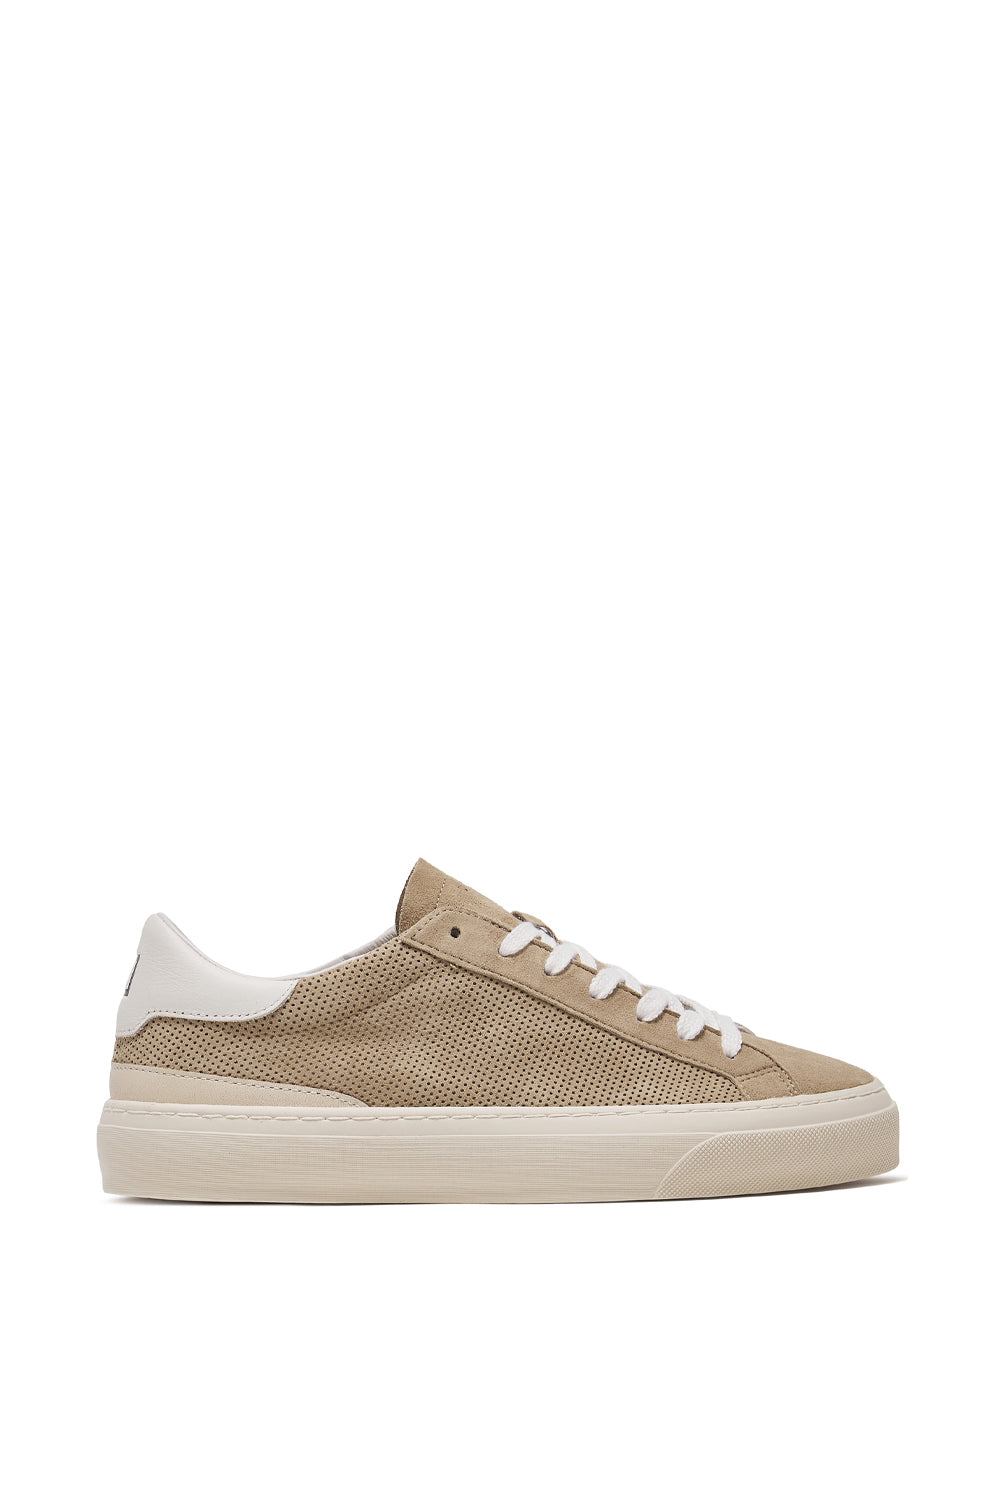 Buy the D.A.T.E. Sonica Powder Sneaker in Beige at Intro. Spend £50 for free UK delivery. Official stockists. We ship worldwide.